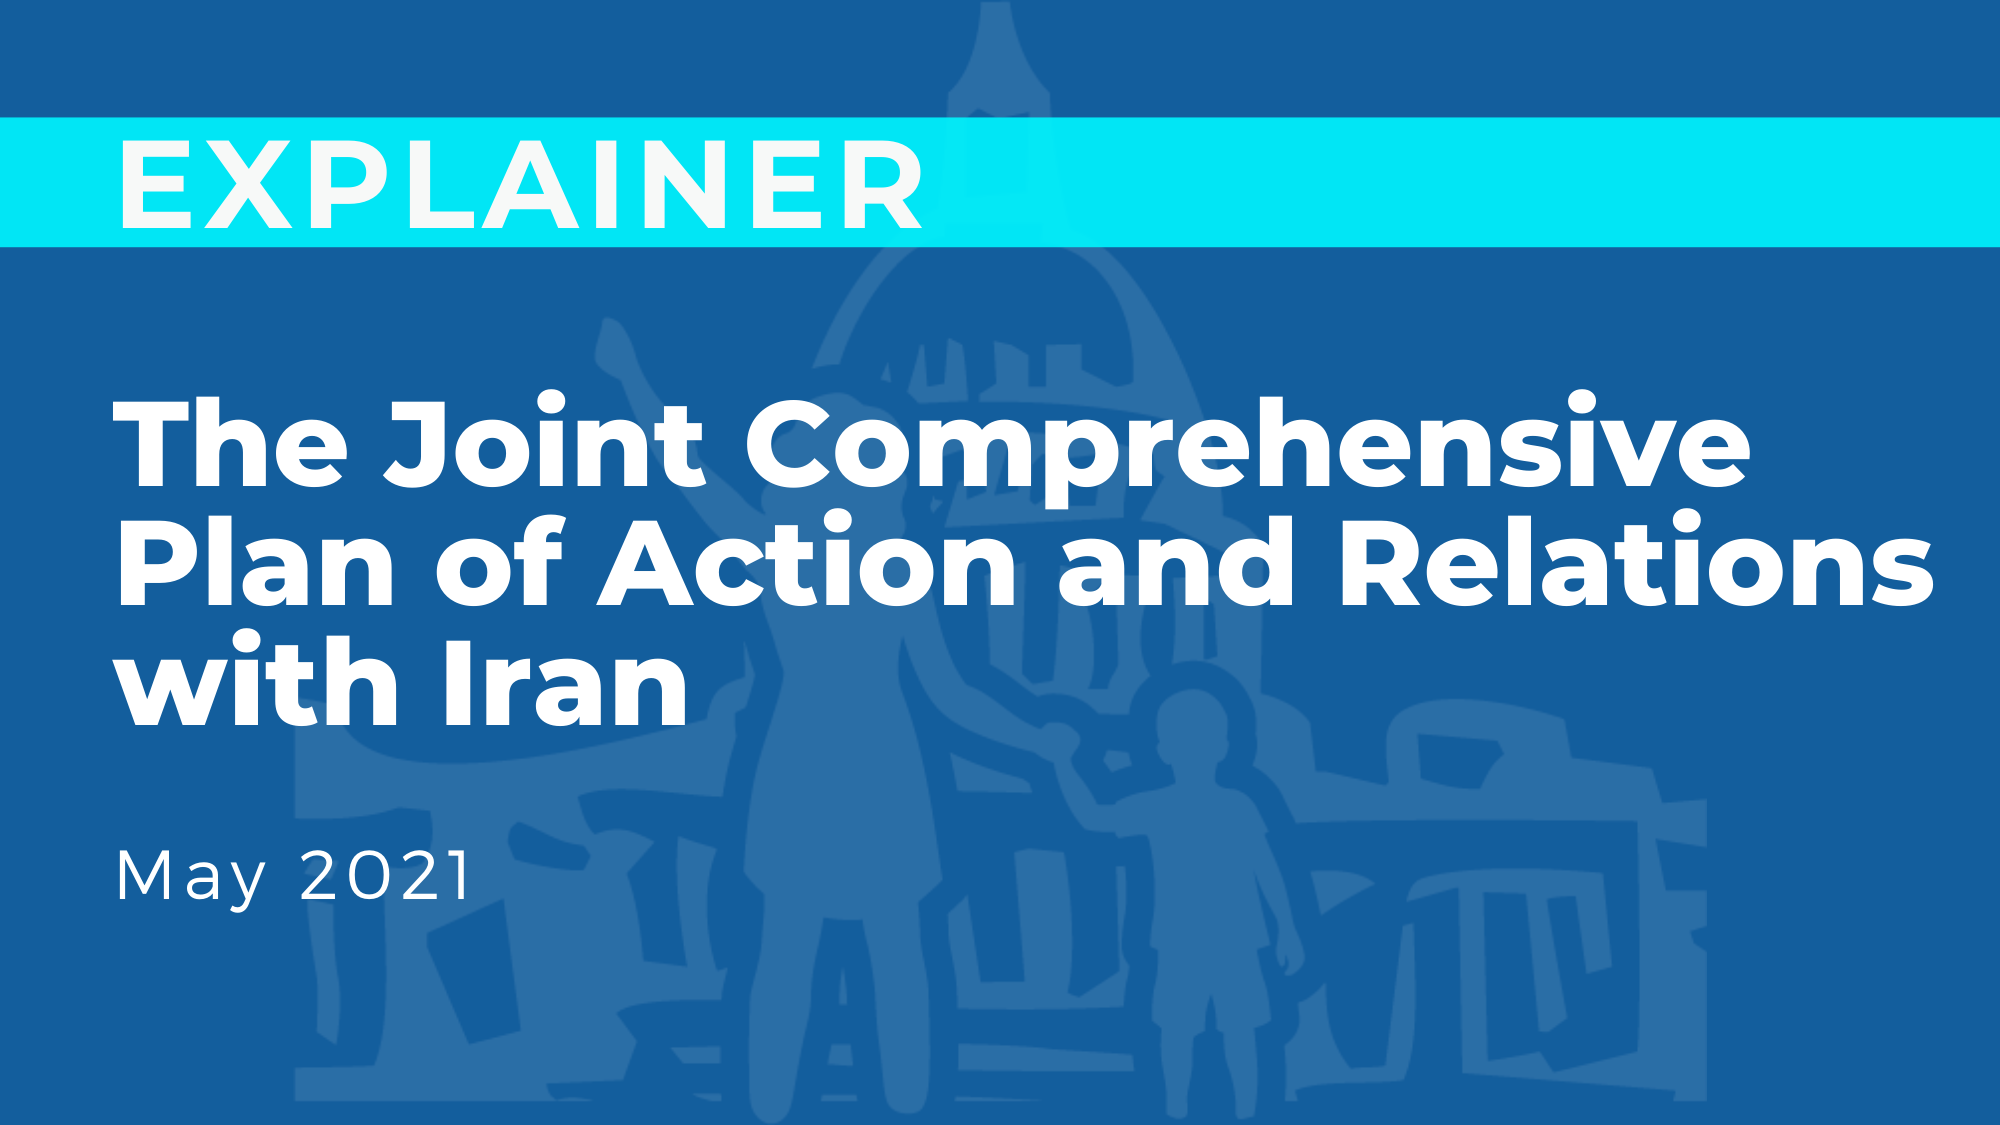 The Joint Comprehensive Plan of Action and Relations with Iran